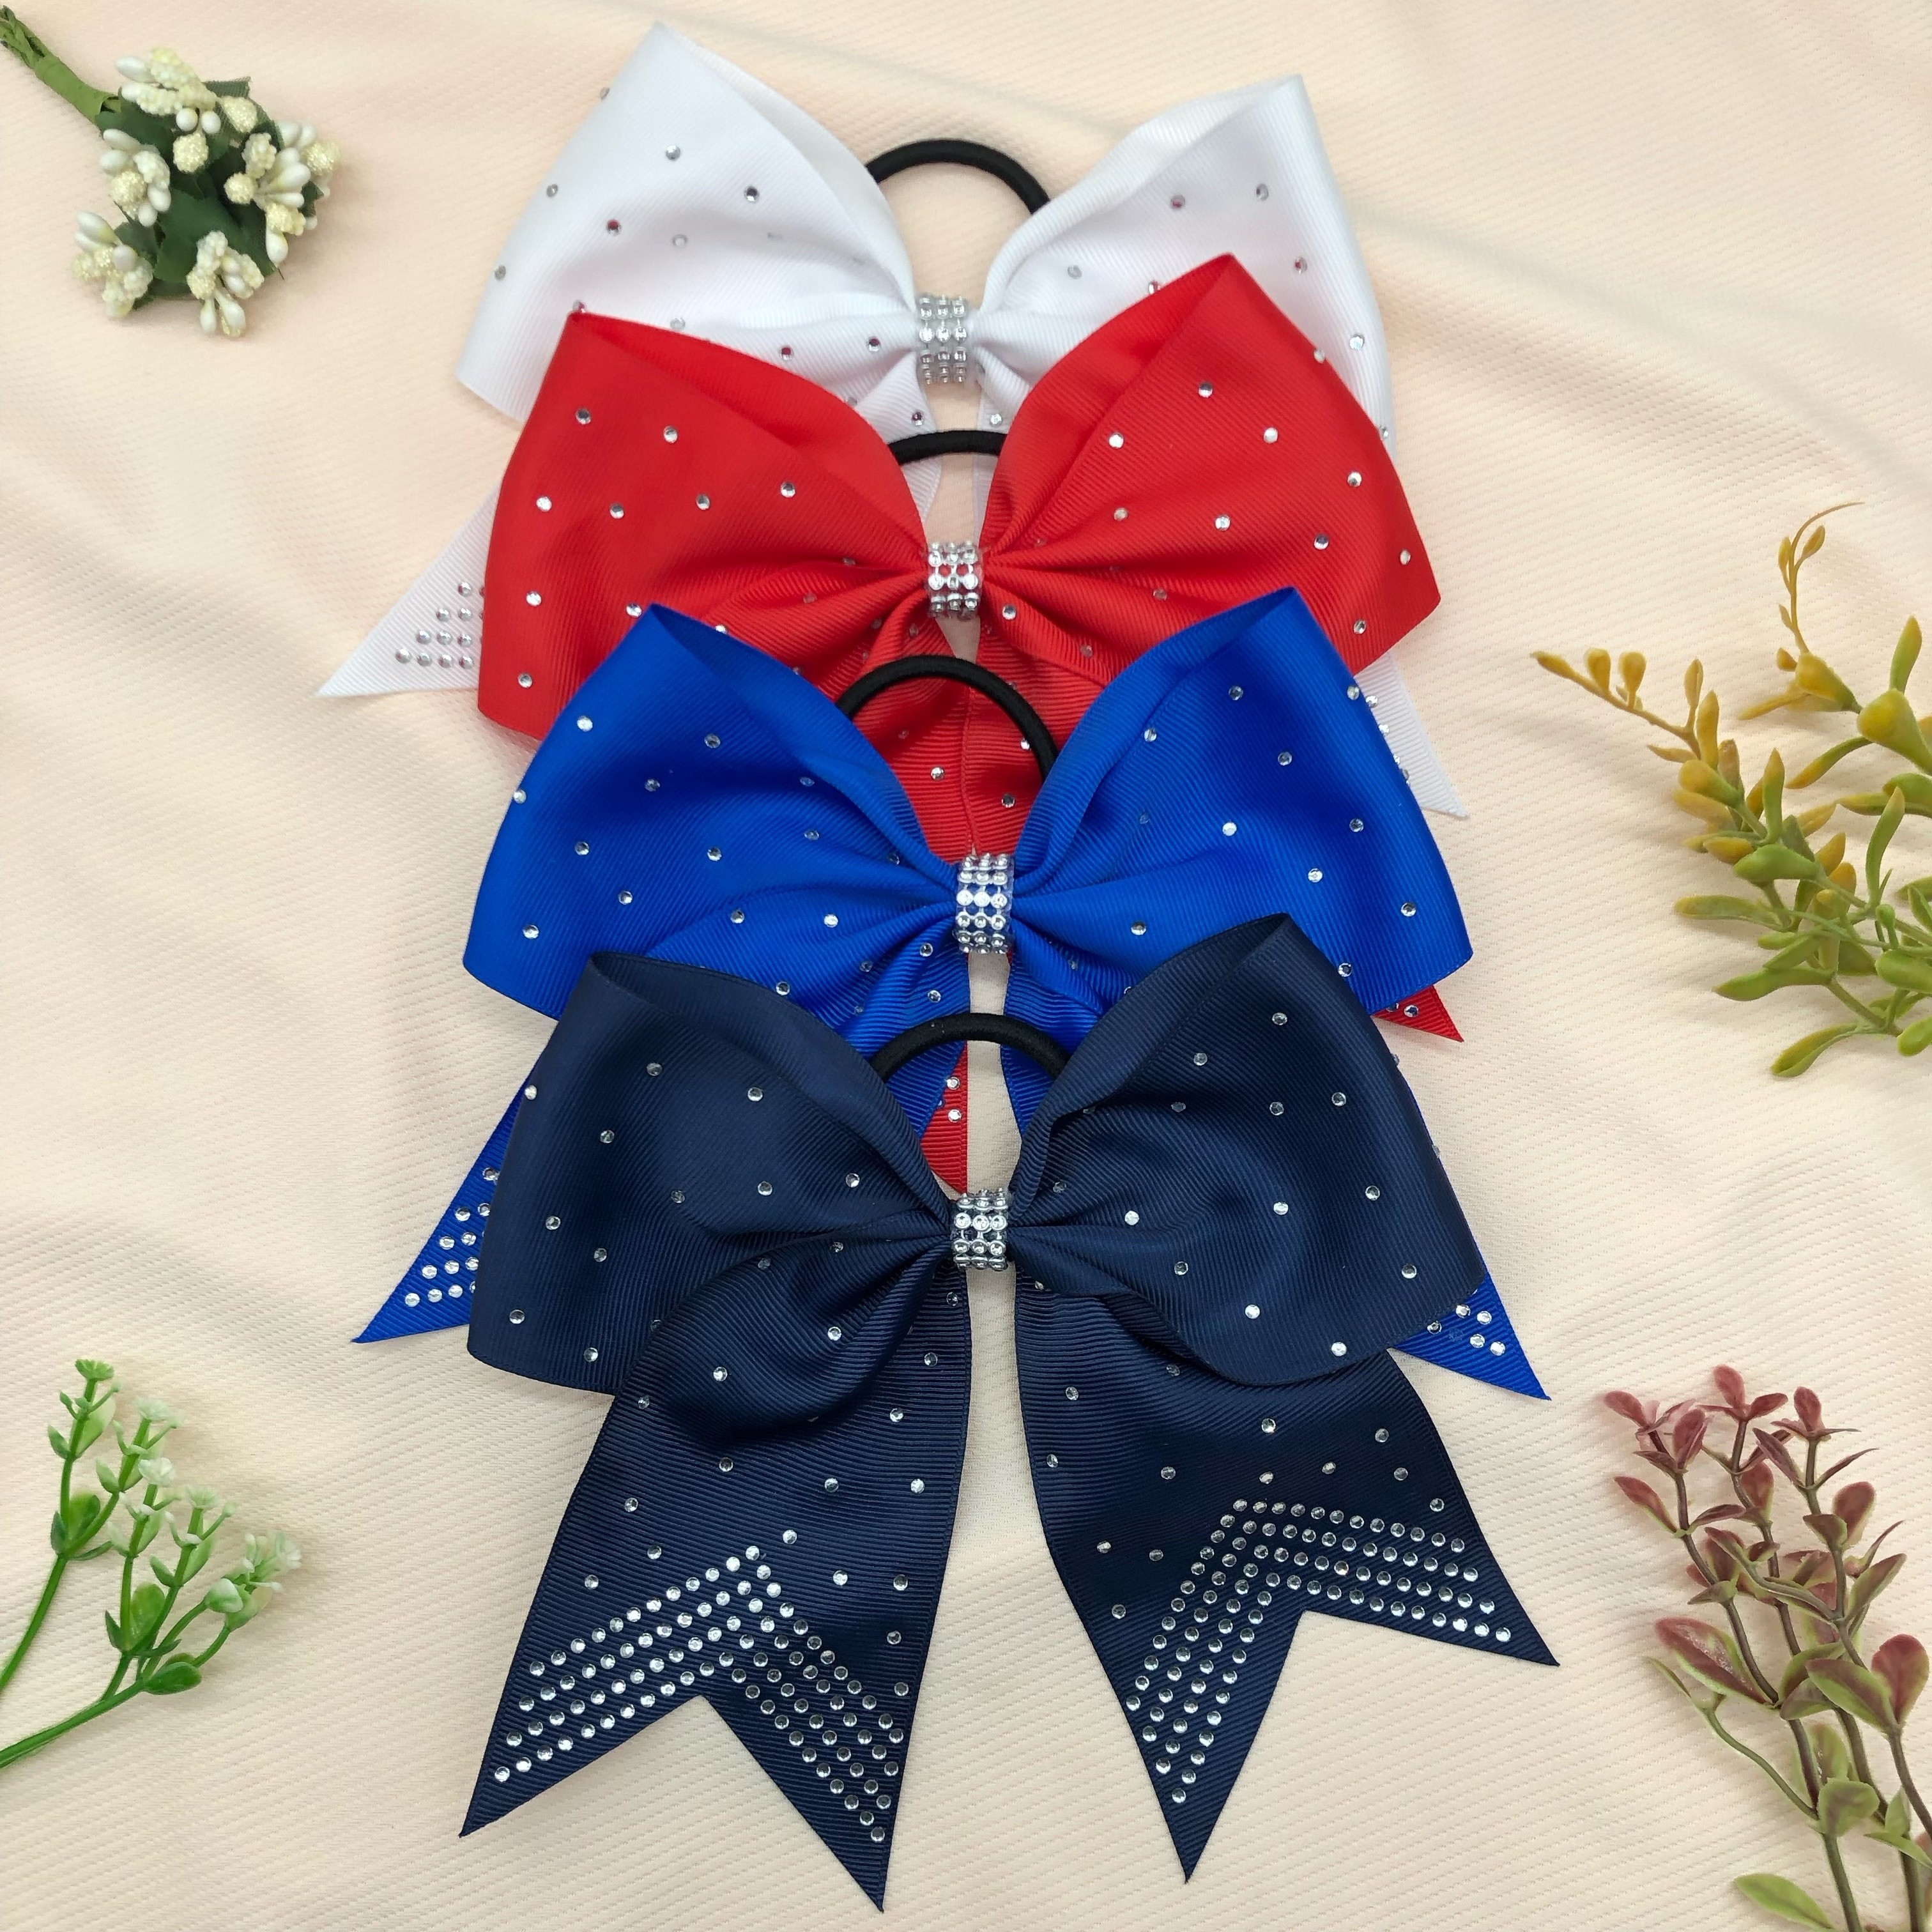 

Plain Color Rhinestones Decor Cheer Bow Hair Ties, Bow Perfect Ponytail Holder, Elastic Hair Bands For Cheerleader Gifts